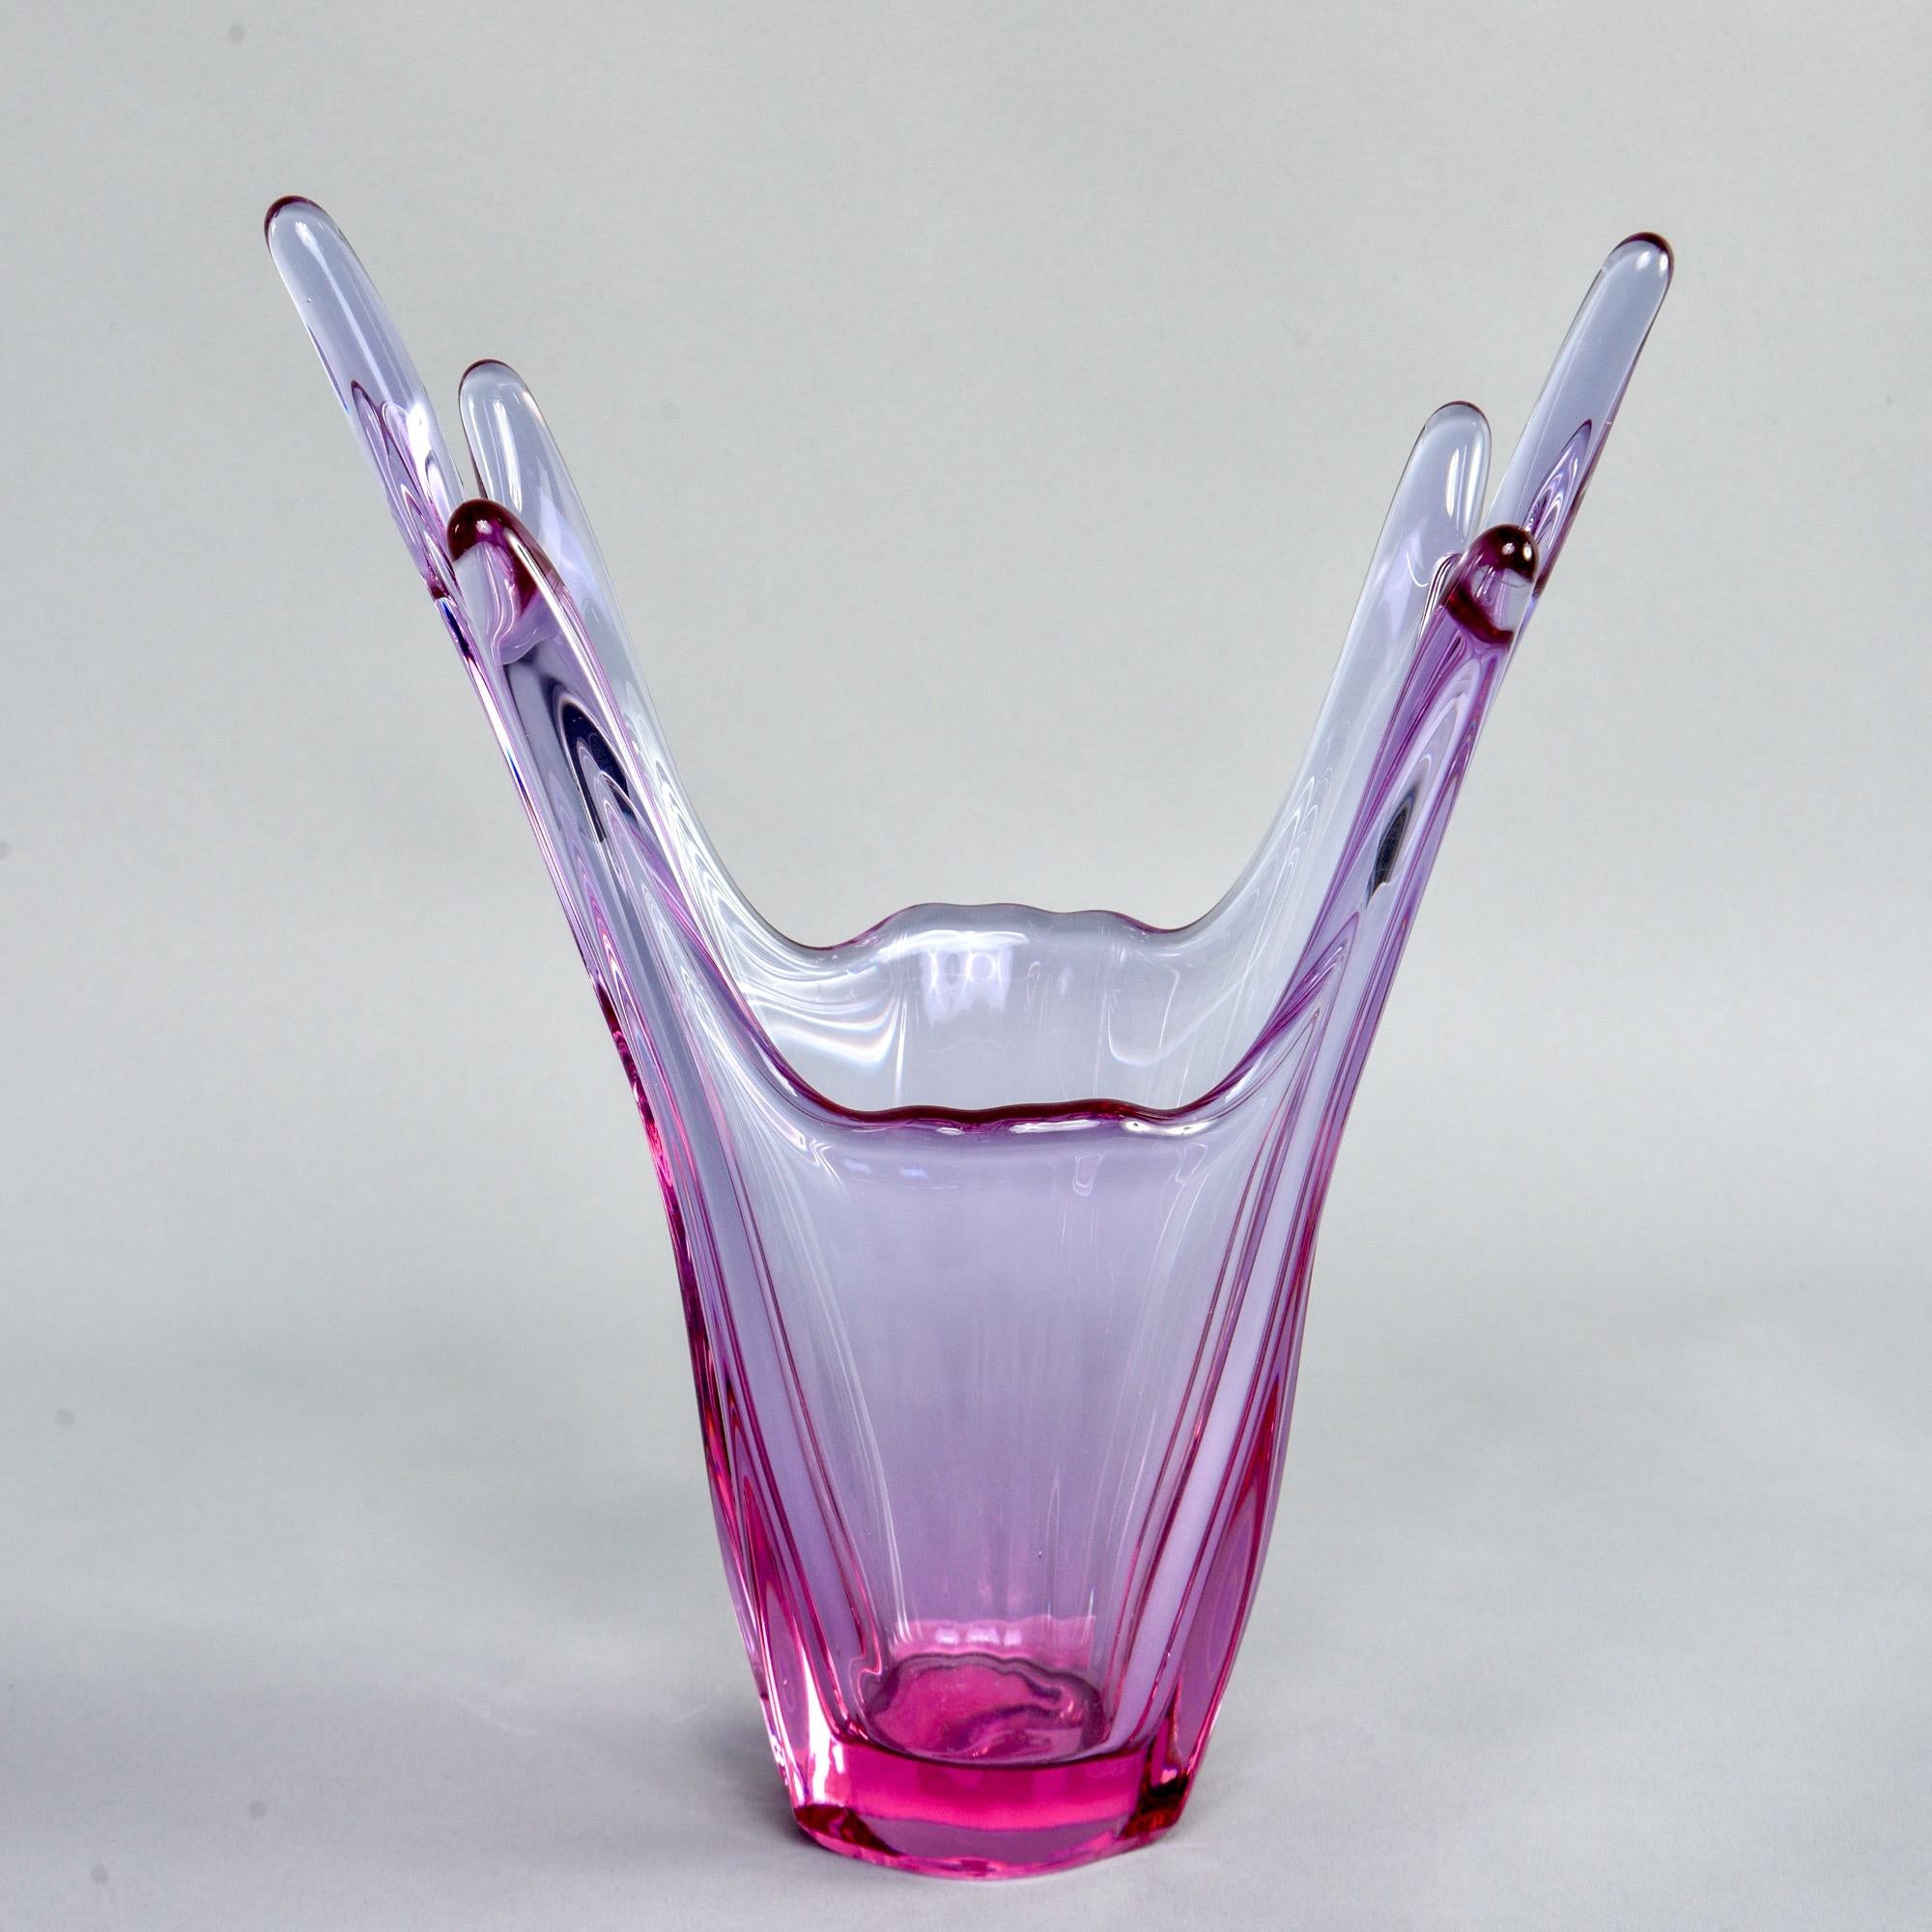 Art glass center piece attributed to Val St. Lambert of Belgium with tall, freeform sides in a stunning shade of orchid purple/pink, circa 1960s. No signature or maker’s mark found, but that's not unusual for pieces produced by Val St. Lambert at